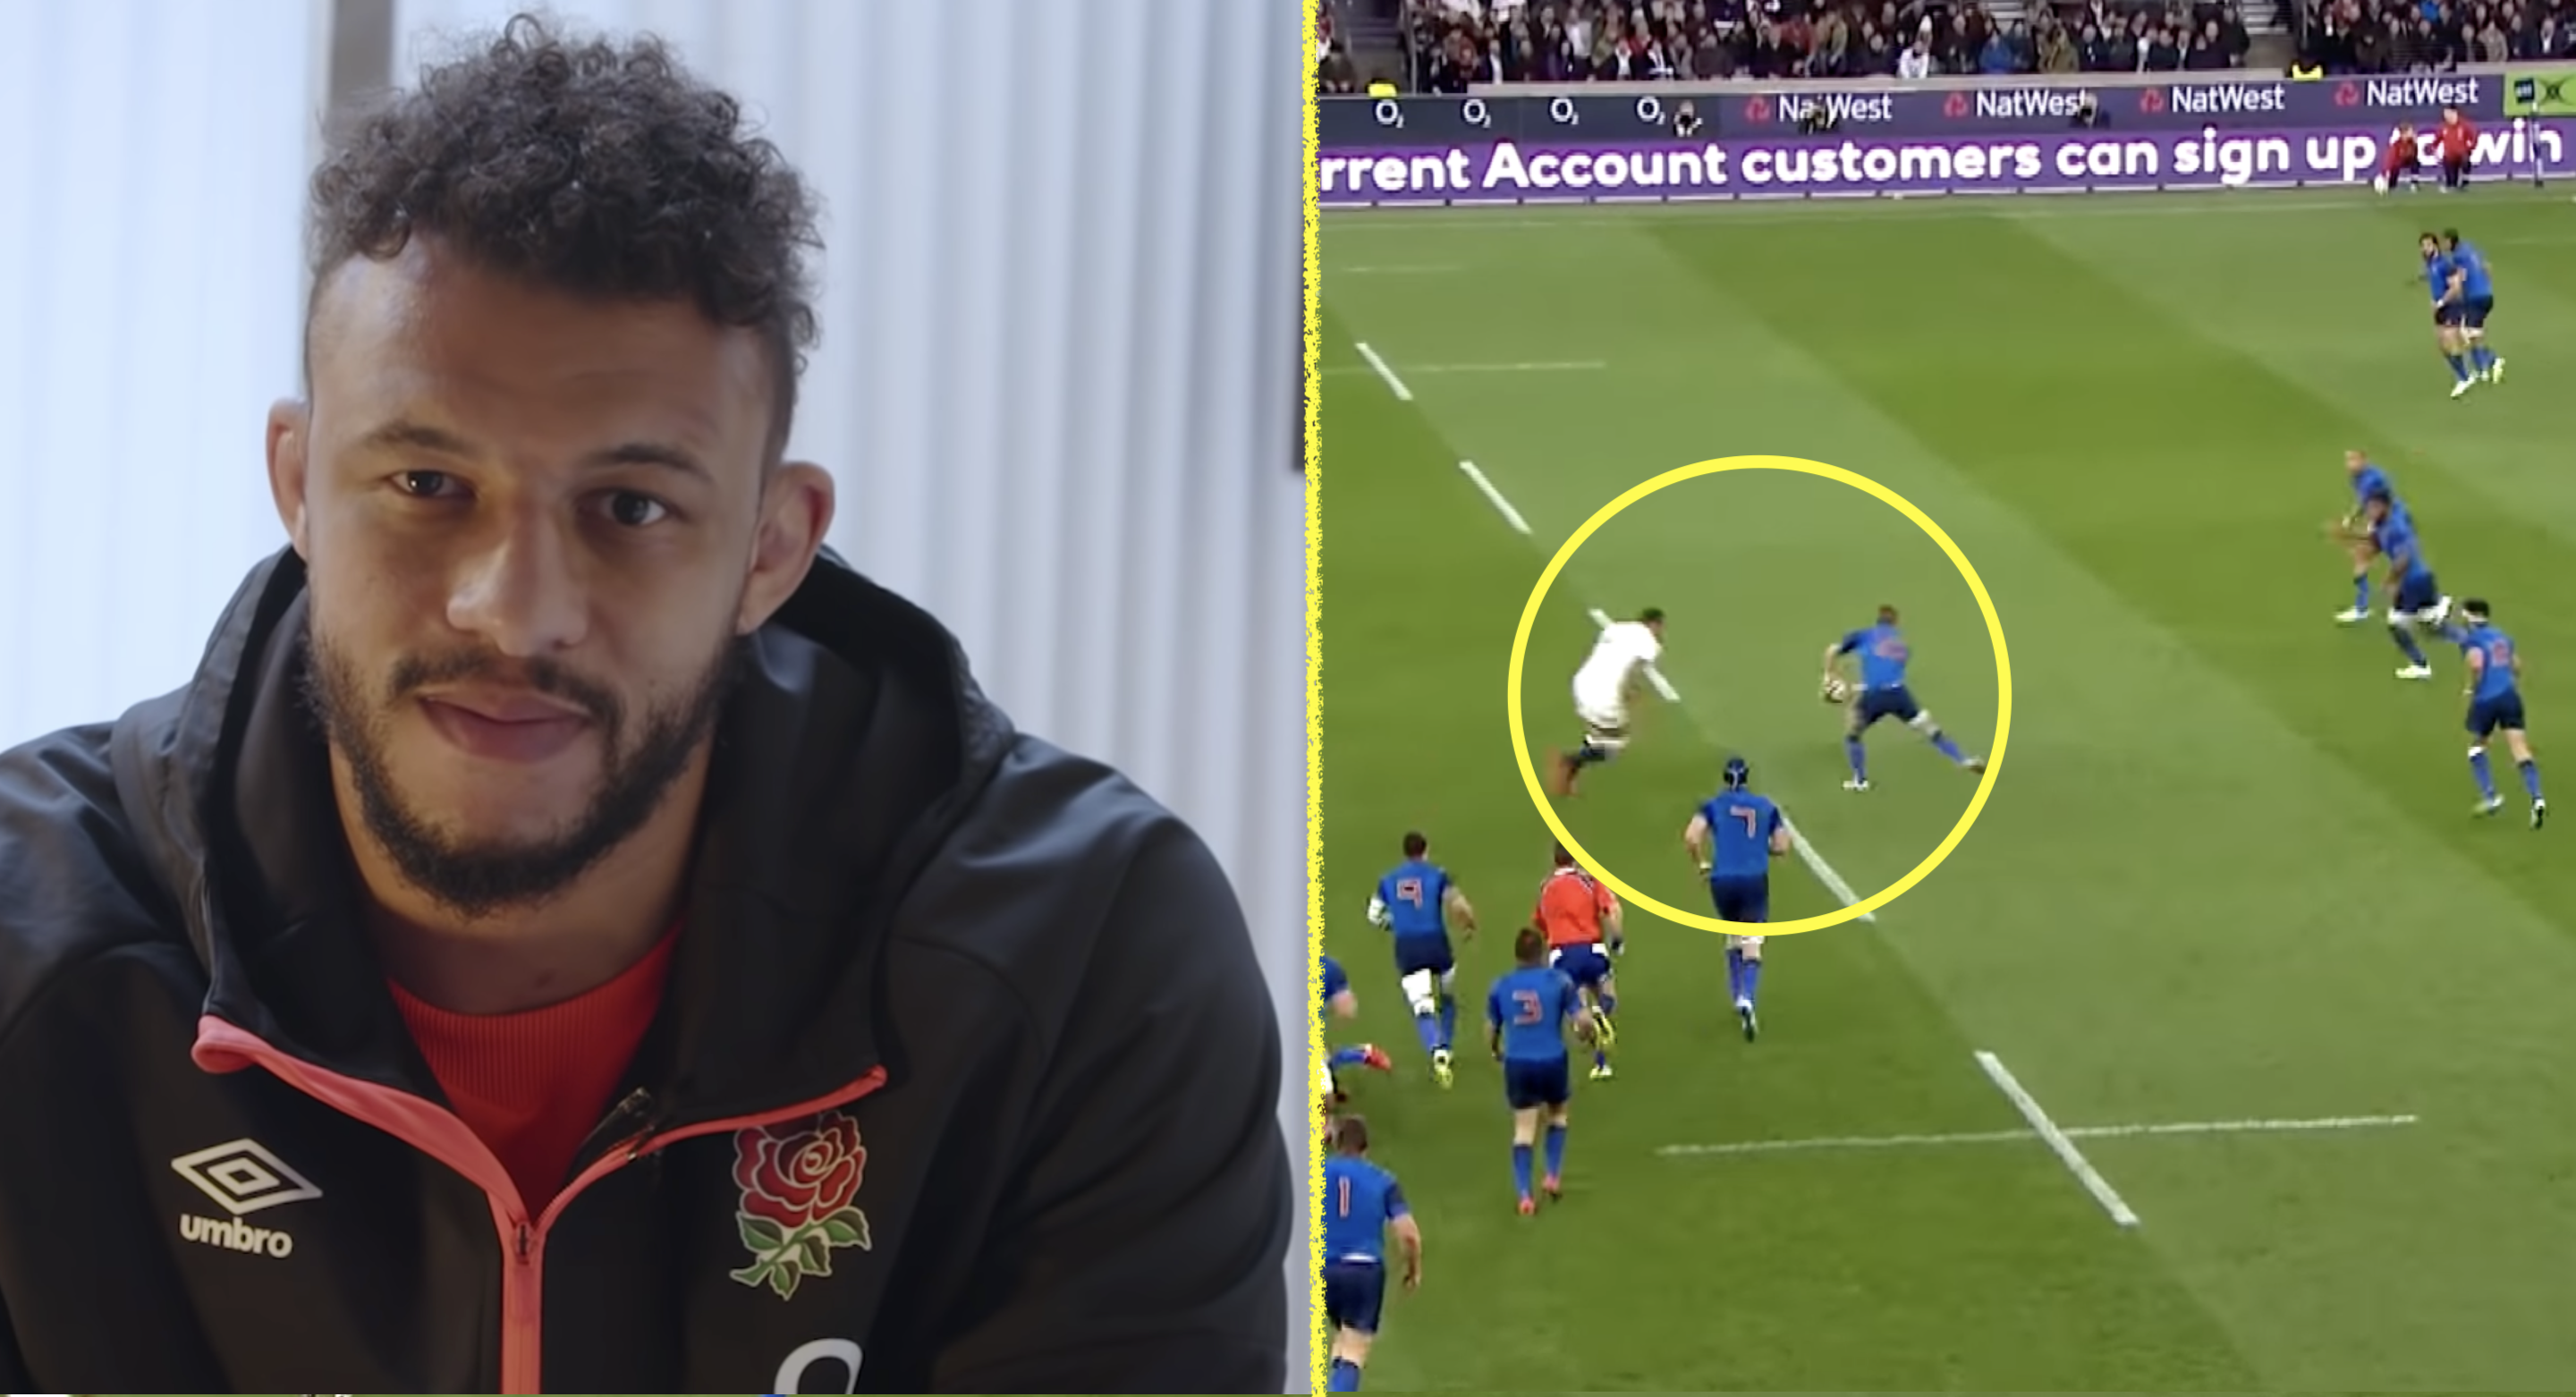 Courtney Lawes singled out as the perfect tackler